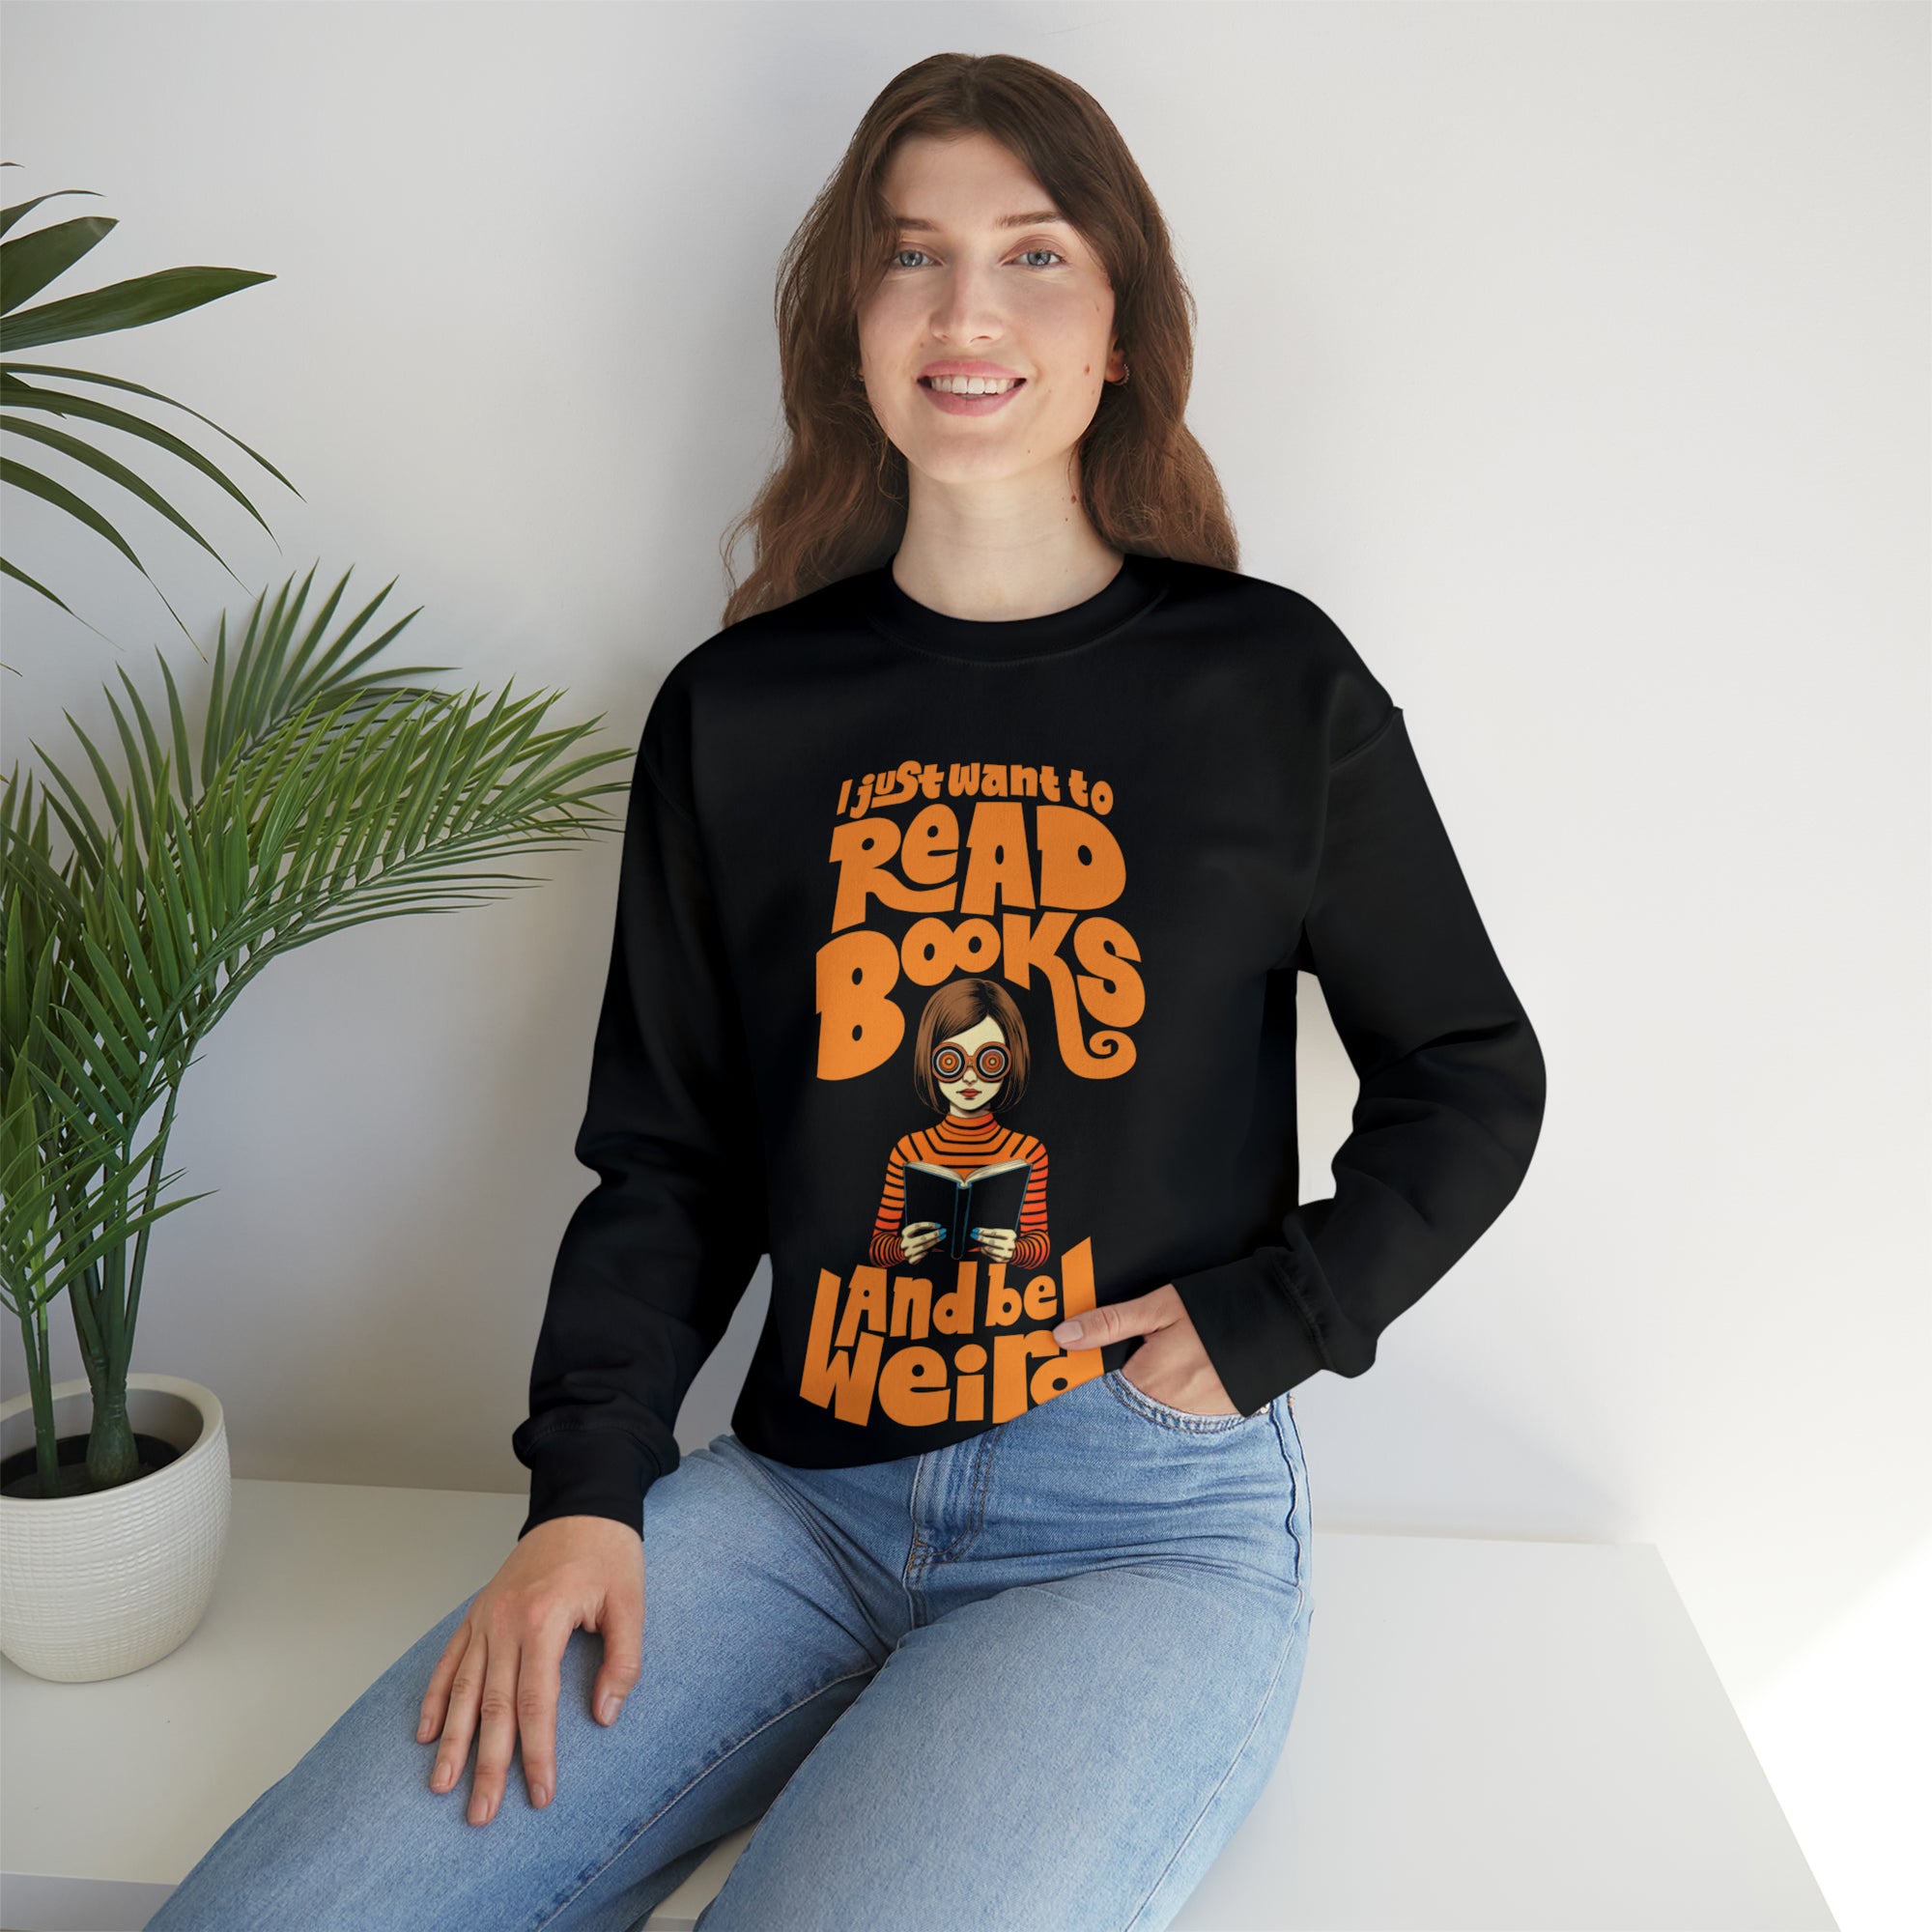 I Just Want To Read Books and Be Weird Crewneck Sweatshirt